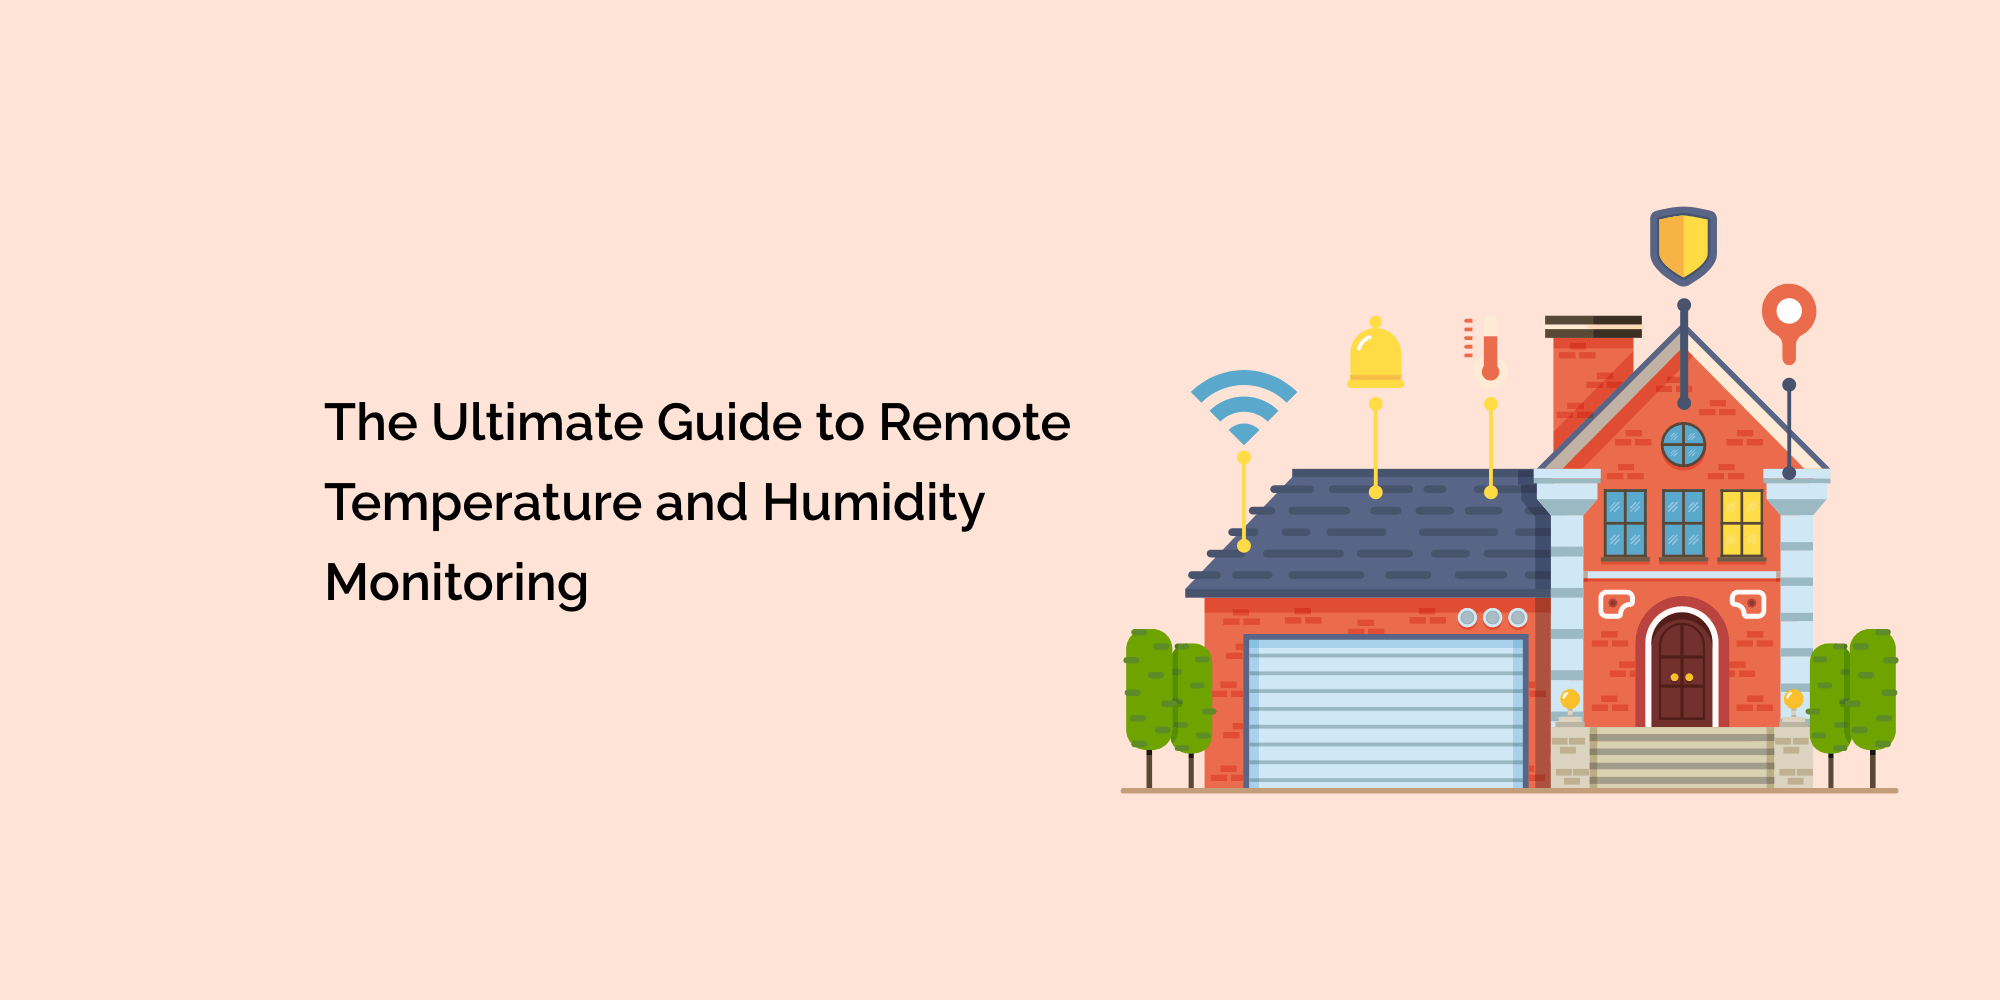 The Ultimate Guide to Remote Temperature and Humidity Monitoring